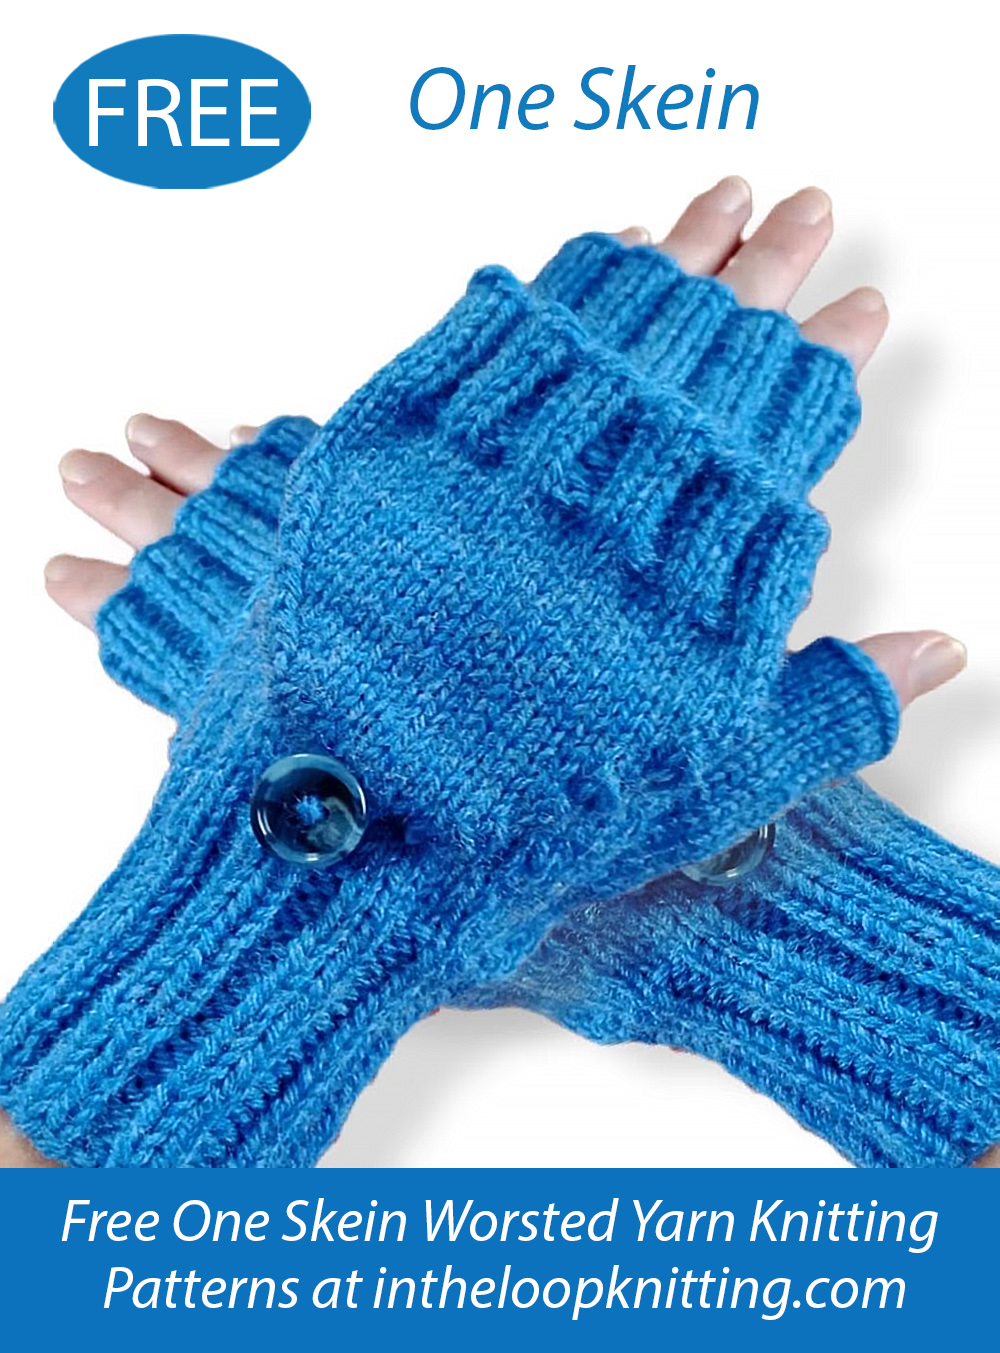 Free One Skein Fingerless Mitts with a Flap Knitting Pattern